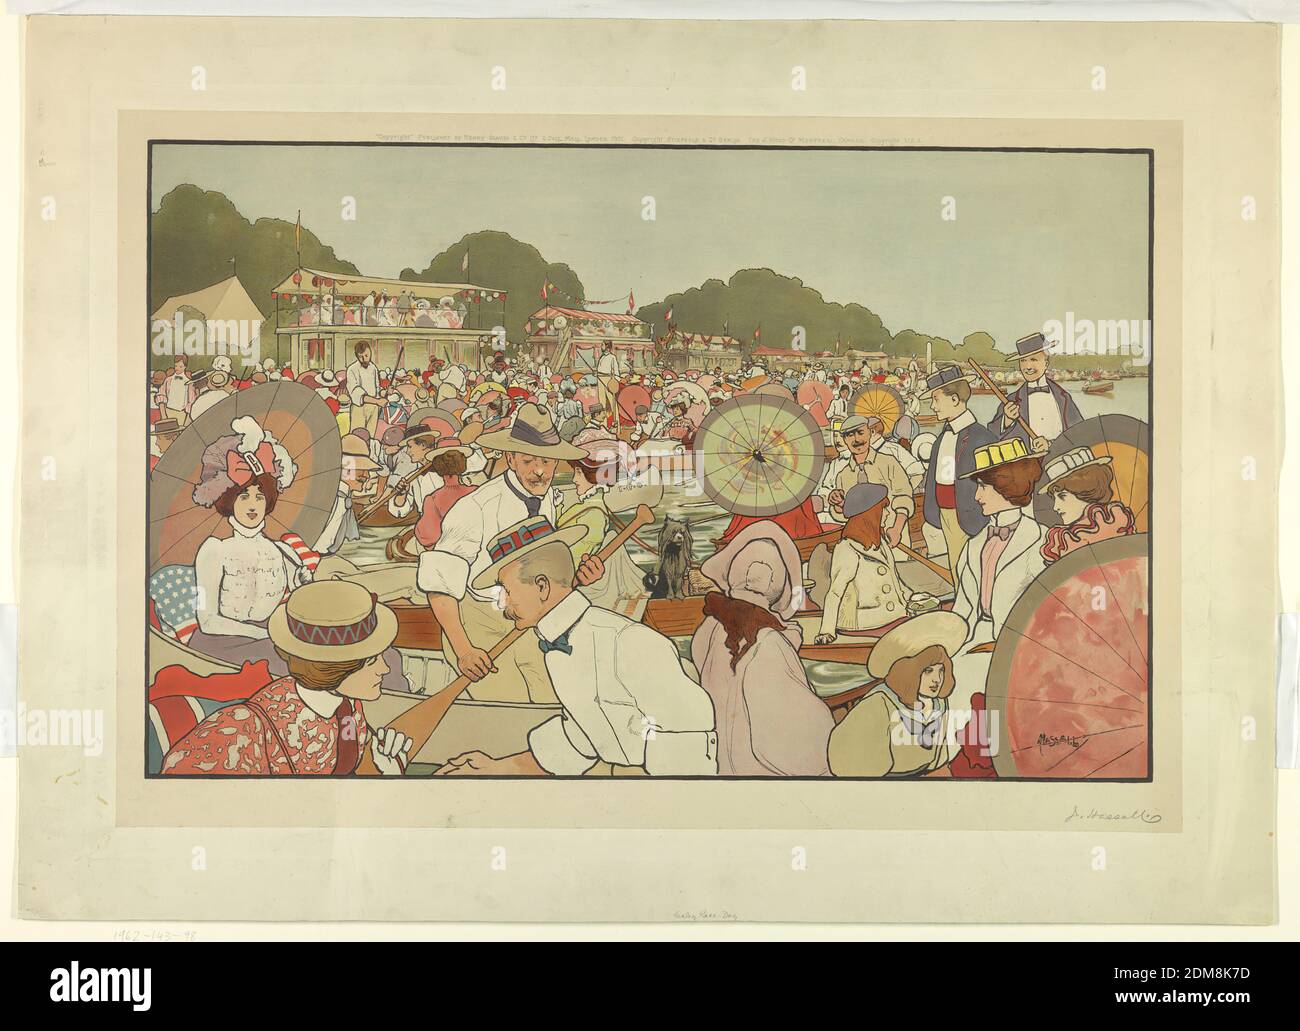 Henley Race Day, John Hassall, British, 1868 - 1948, Henry Graves, British, 1806 - 1892, Chromolithograph on paper, mounted, One bank of the Thames at Henley, with many crowded boats and pavilions. The figures, boats, trees, etc. all outlined in black. Artist's name, lower right, and below in graphite. Publisher's name and date above., London, England, Paris, France, 1901, chromolithograph, chromolithograph Stock Photo